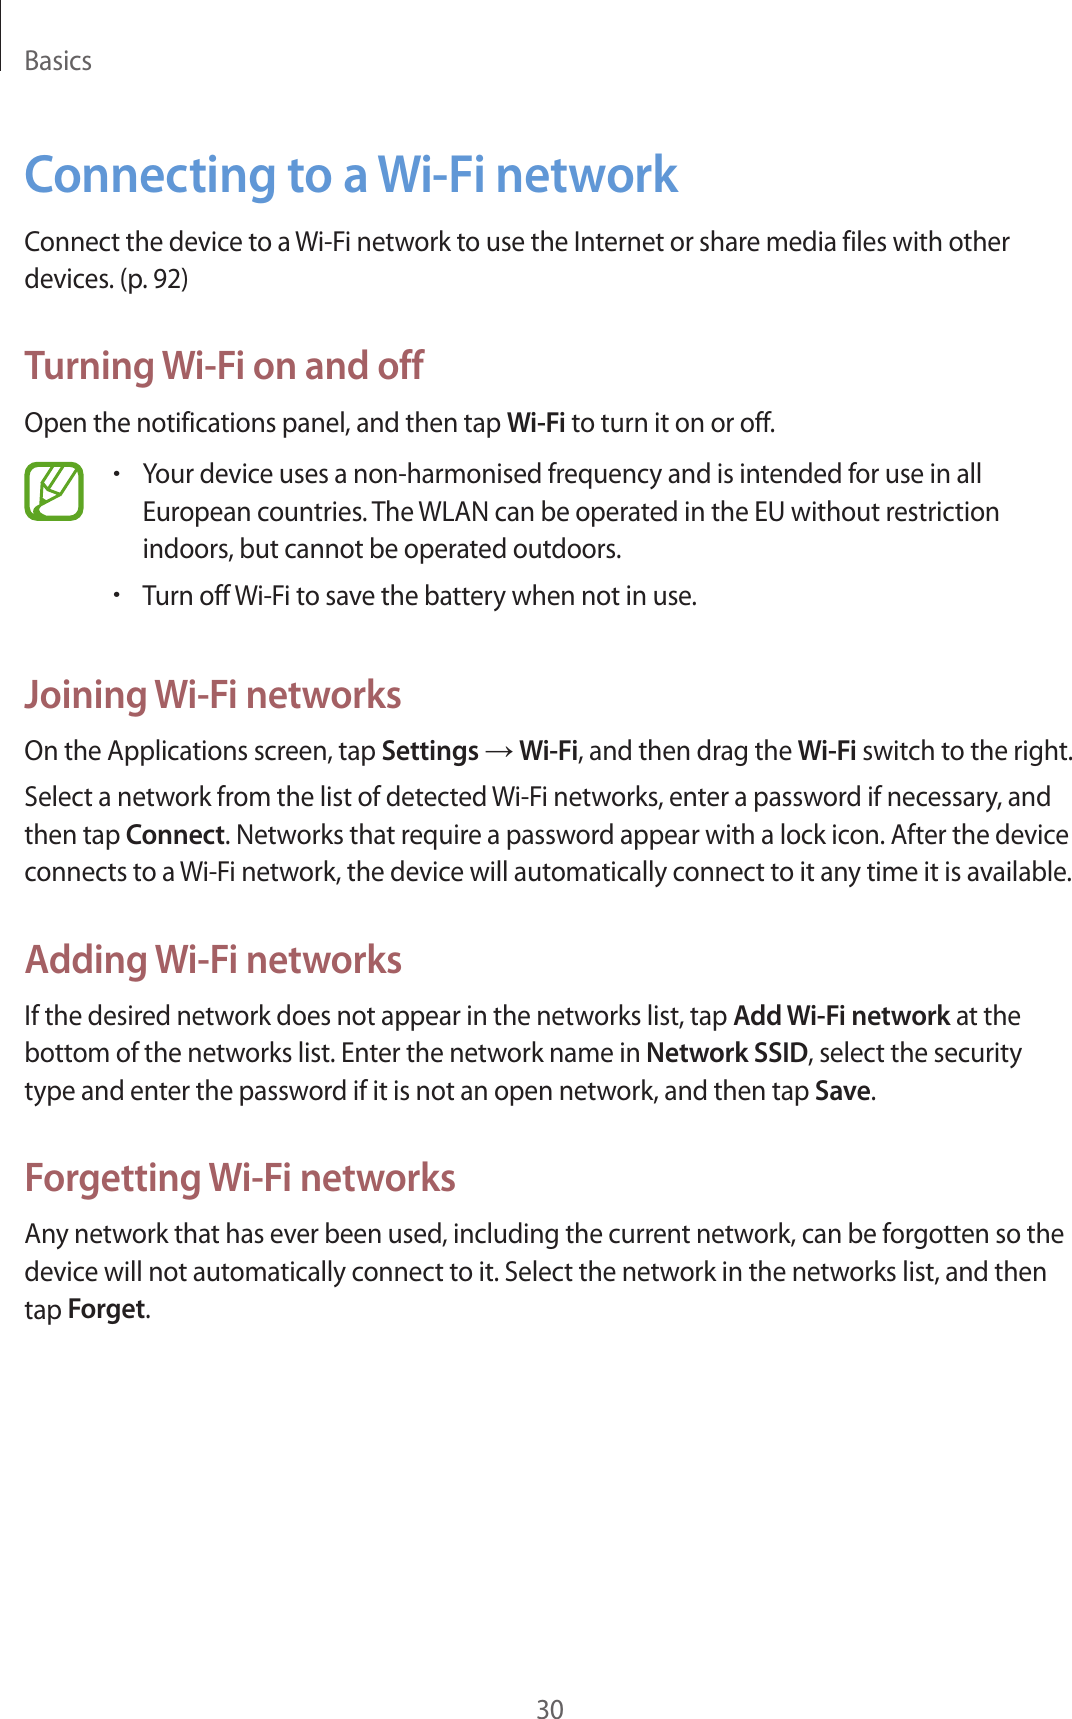 Basics30Connecting to a Wi-Fi networkConnect the device to a Wi-Fi network to use the Internet or share media files with other devices. (p. 92)Turning Wi-Fi on and offOpen the notifications panel, and then tap Wi-Fi to turn it on or off.•Your device uses a non-harmonised frequency and is intended for use in all European countries. The WLAN can be operated in the EU without restriction indoors, but cannot be operated outdoors.•Turn off Wi-Fi to save the battery when not in use.Joining Wi-Fi networksOn the Applications screen, tap Settings → Wi-Fi, and then drag the Wi-Fi switch to the right.Select a network from the list of detected Wi-Fi networks, enter a password if necessary, and then tap Connect. Networks that require a password appear with a lock icon. After the device connects to a Wi-Fi network, the device will automatically connect to it any time it is available.Adding Wi-Fi networksIf the desired network does not appear in the networks list, tap Add Wi-Fi network at the bottom of the networks list. Enter the network name in Network SSID, select the security type and enter the password if it is not an open network, and then tap Save.Forgetting Wi-Fi networksAny network that has ever been used, including the current network, can be forgotten so the device will not automatically connect to it. Select the network in the networks list, and then tap Forget.